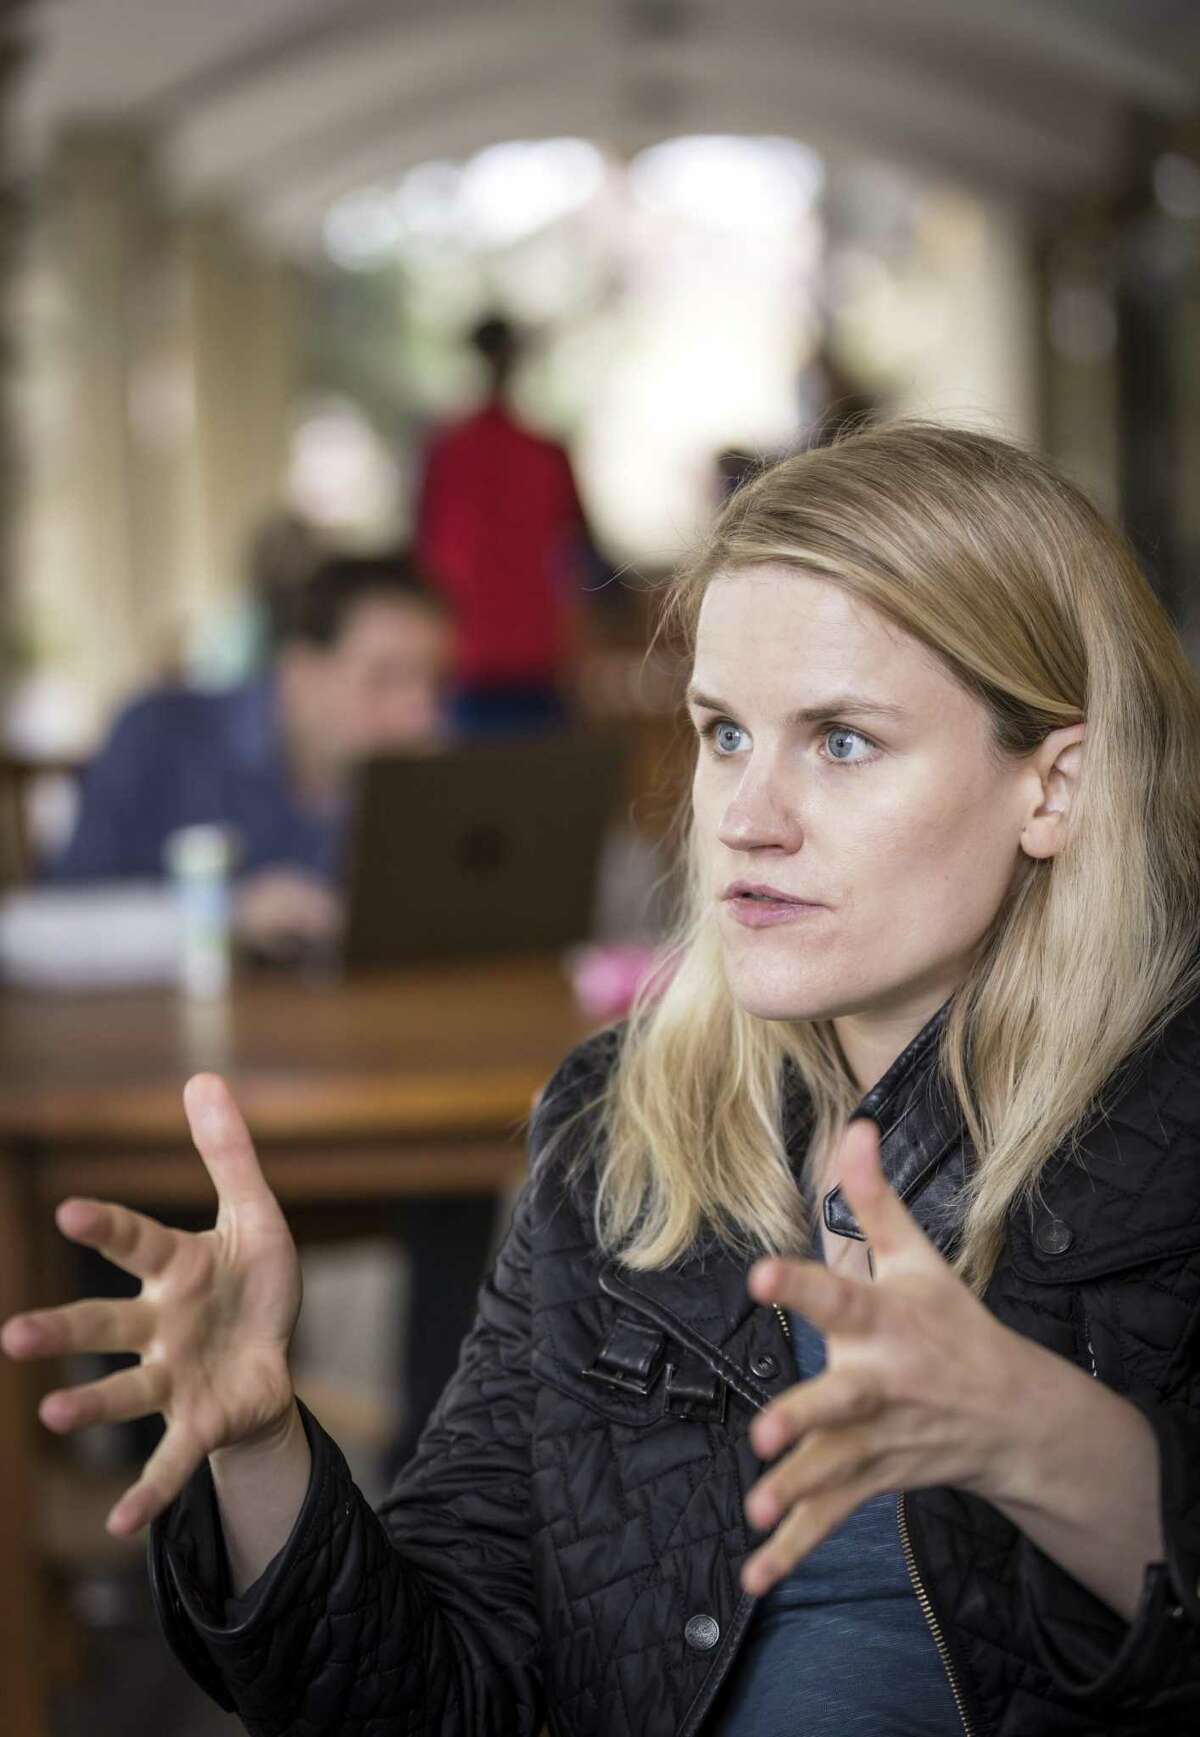 Frances Haugen, a data scientist who came forward as a whistleblower against her employer Facebook said she doesn't discourage tech workers from taking jobs at companies like Meta, which owns Facebook.  She spoke to tech students at Stanford on Thursday.